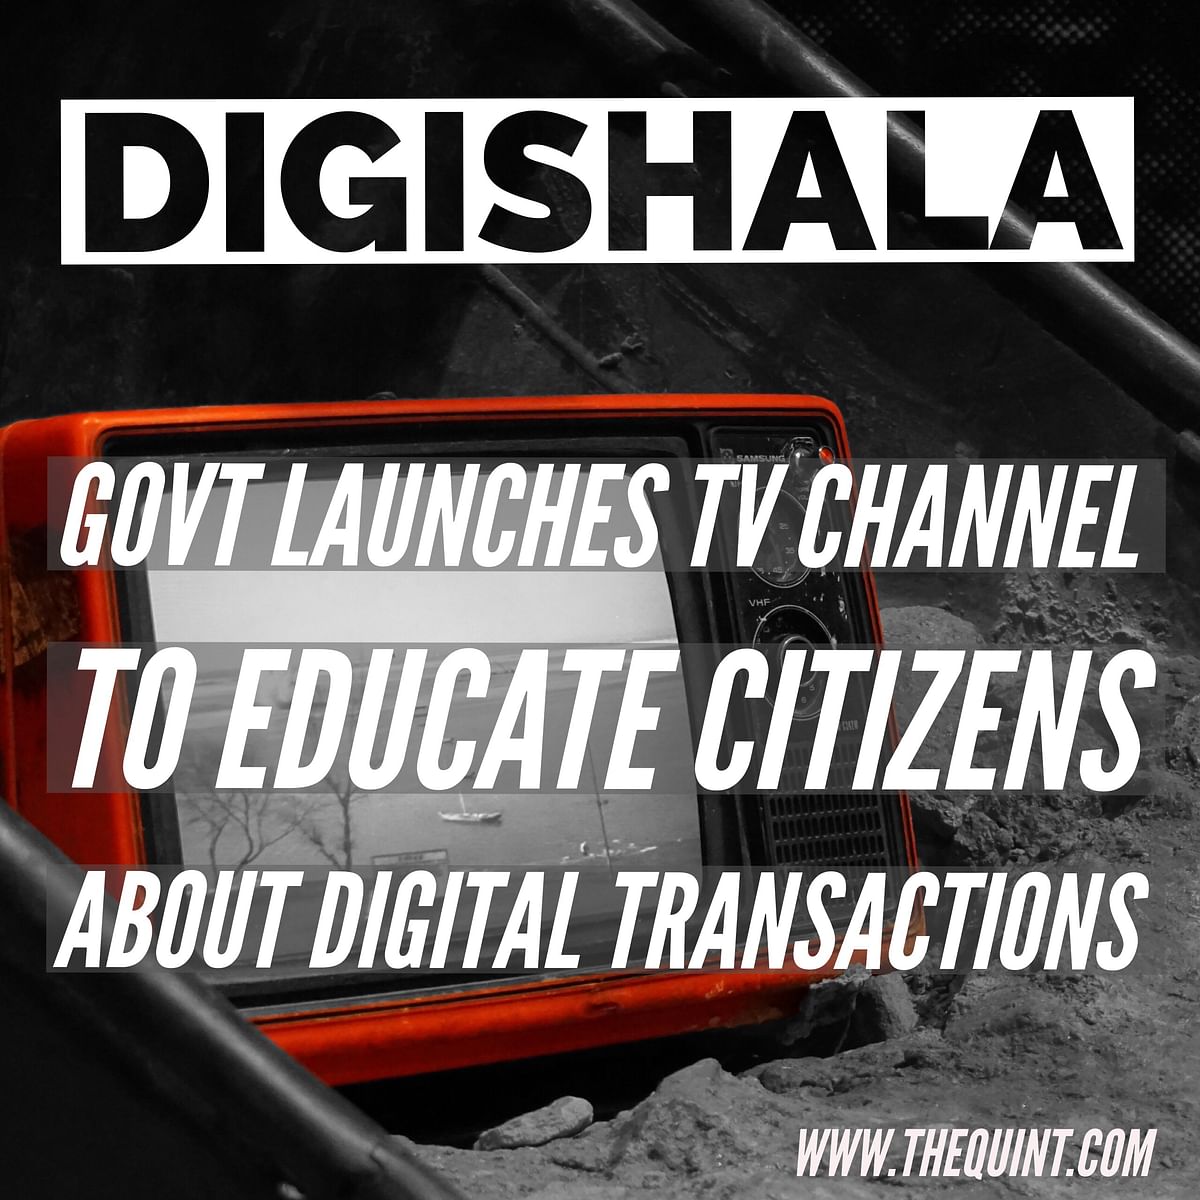 Besides DigiShala TV, the Centre unveiled a website, Cashless India, to instruct people on making digital payments.